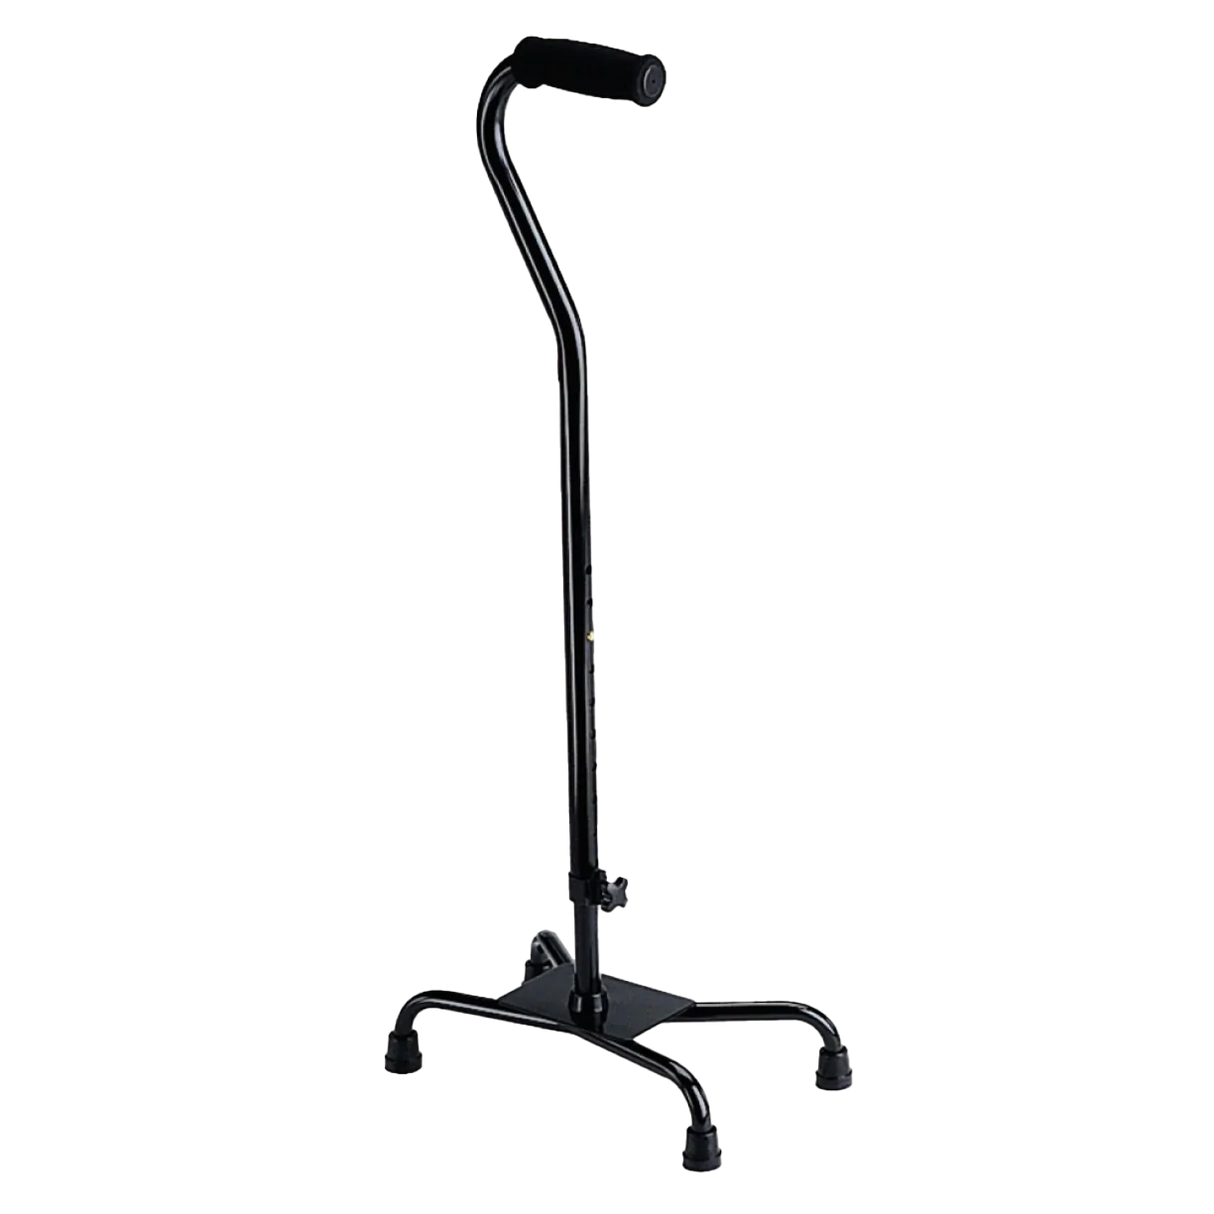 Black self-standing four-footed, nonskid cane product image.